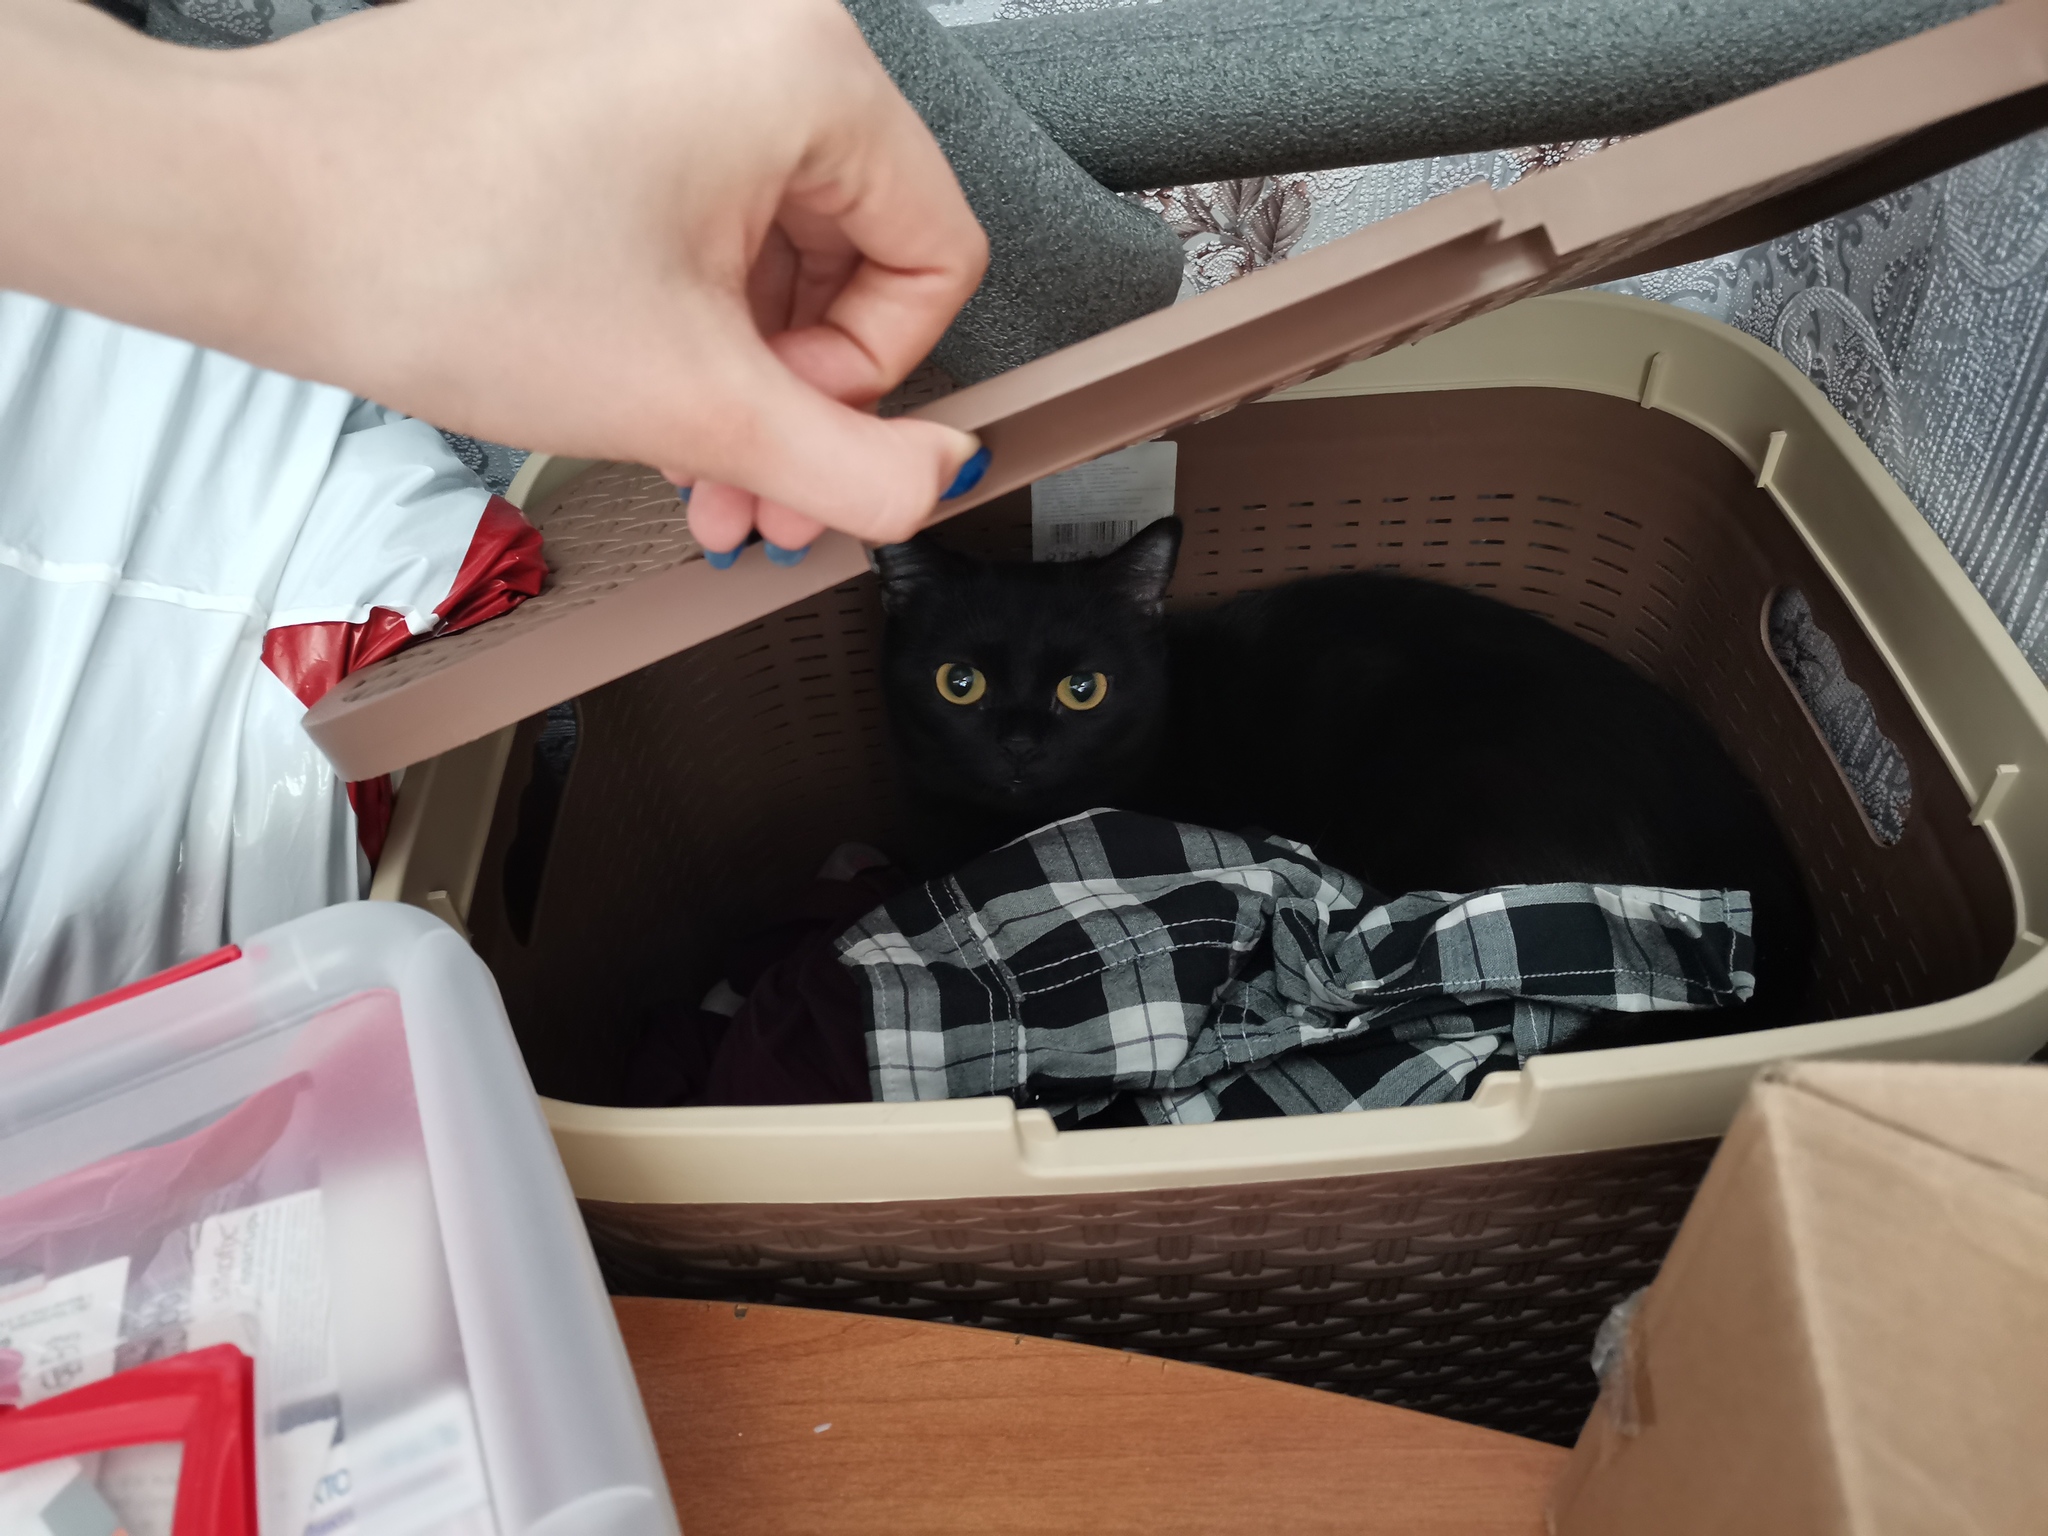 I didn't expect them to find it) - My, Hide and seek, Black cat, cat, Munchkin